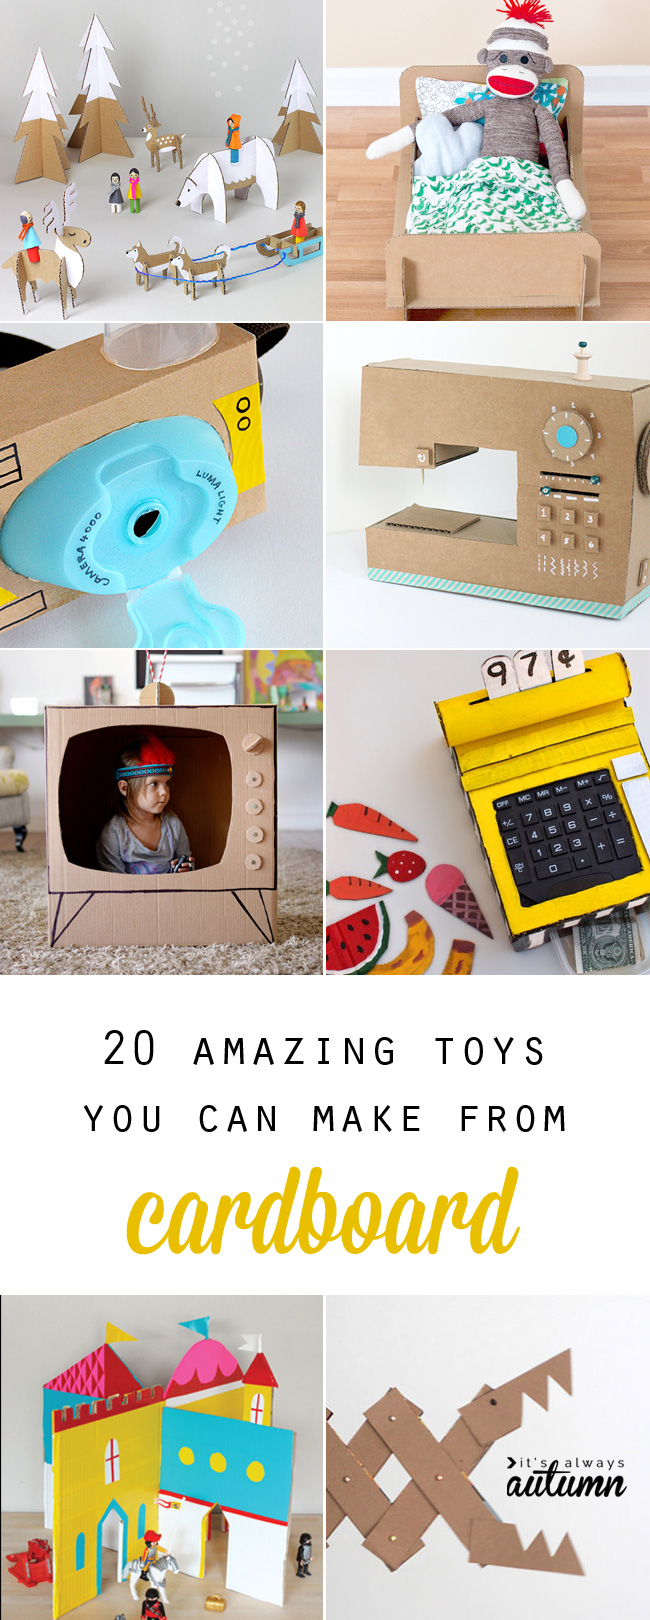 5 Things To Make With Cardboard, Kids Crafts